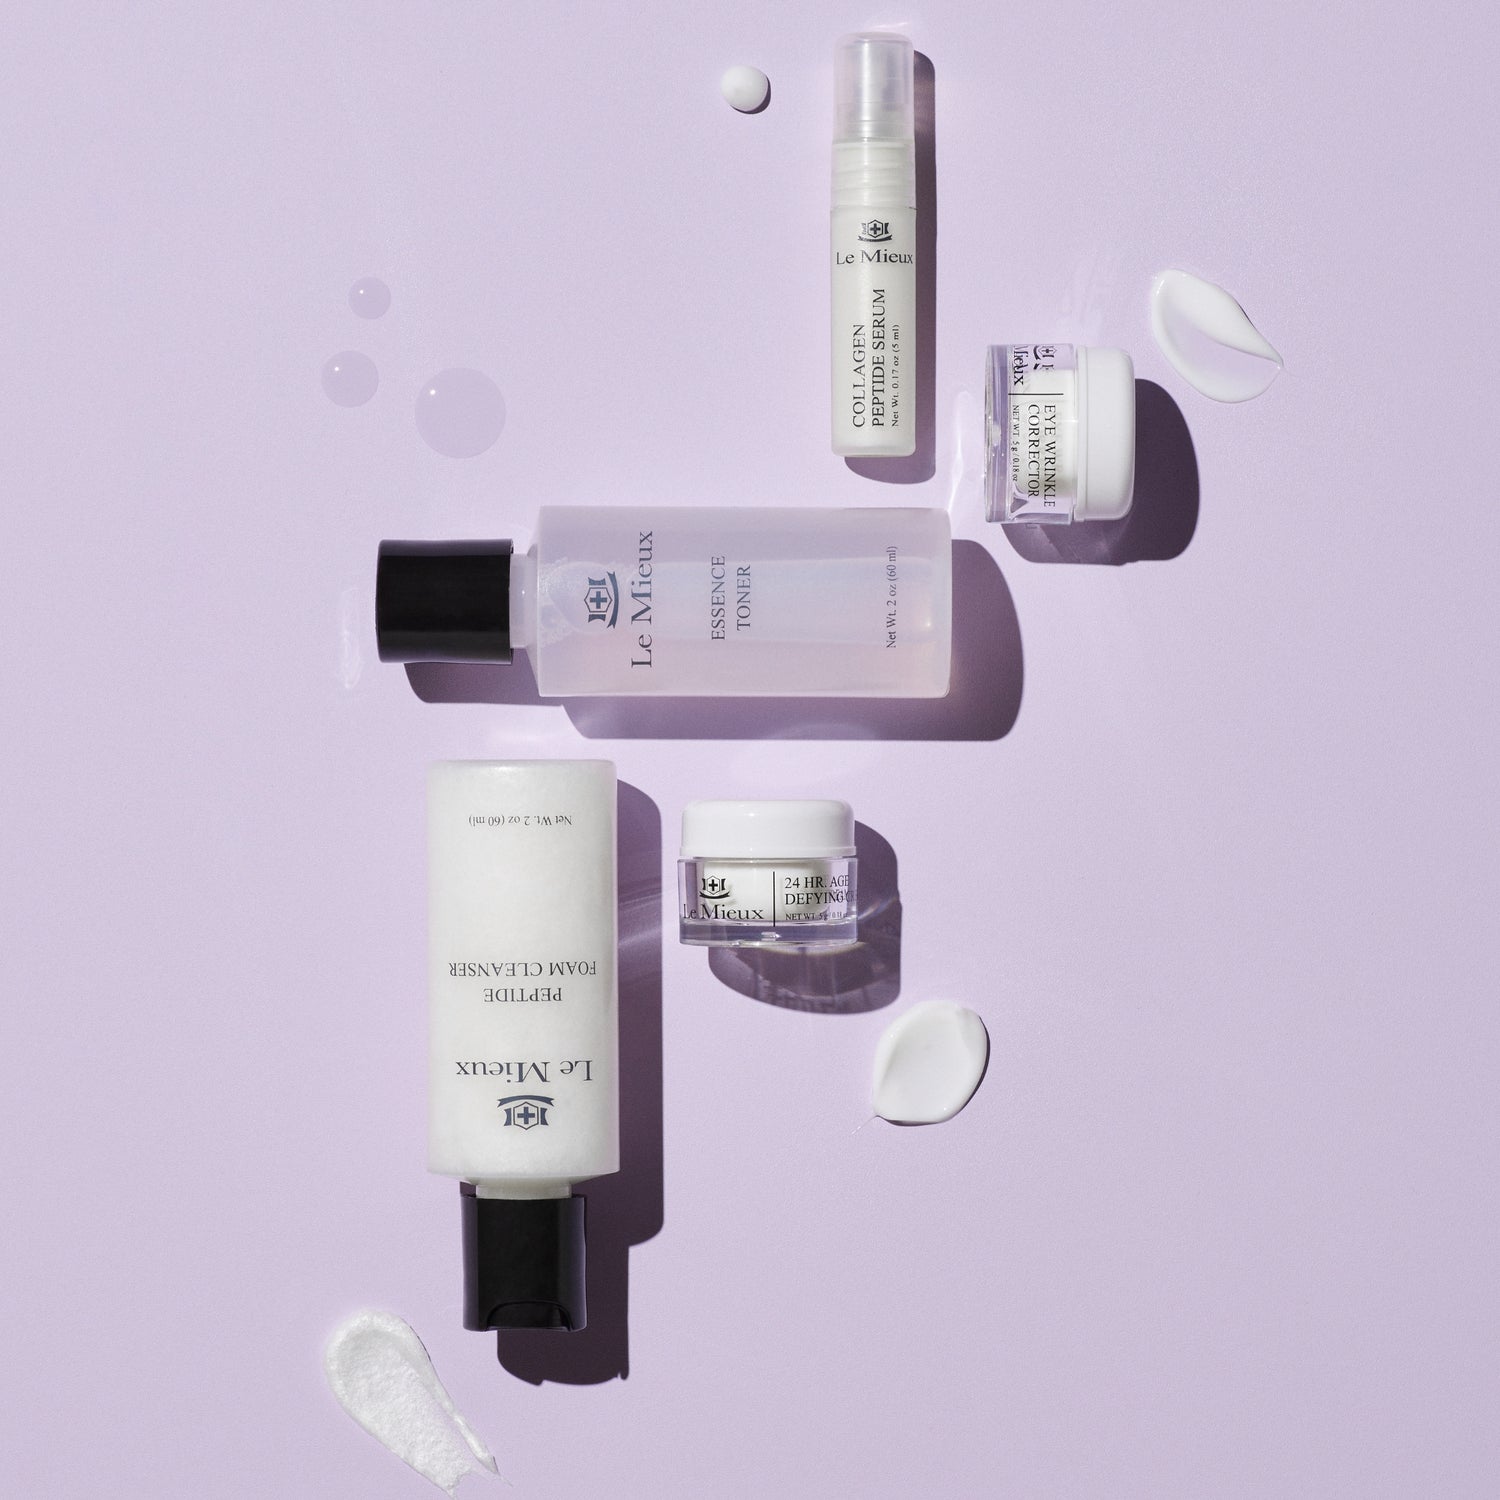  AGE-DEFYING BEAUTY ESSENTIALS from Le Mieux Skincare - 5